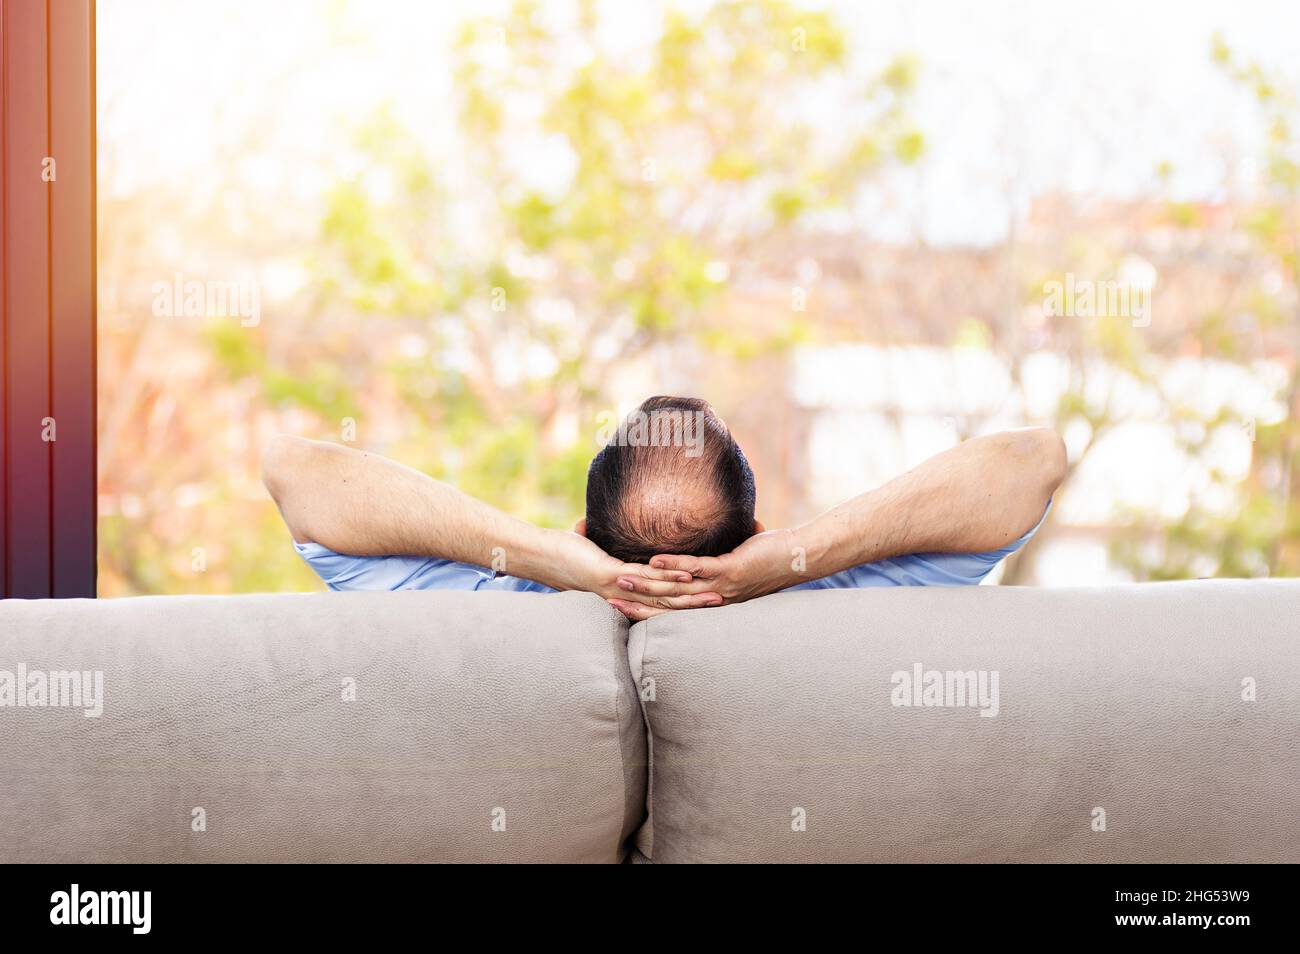 Rear view of a bald and carefree man on a couch at home and looking the green background outdoors through the window in the living room Stock Photo